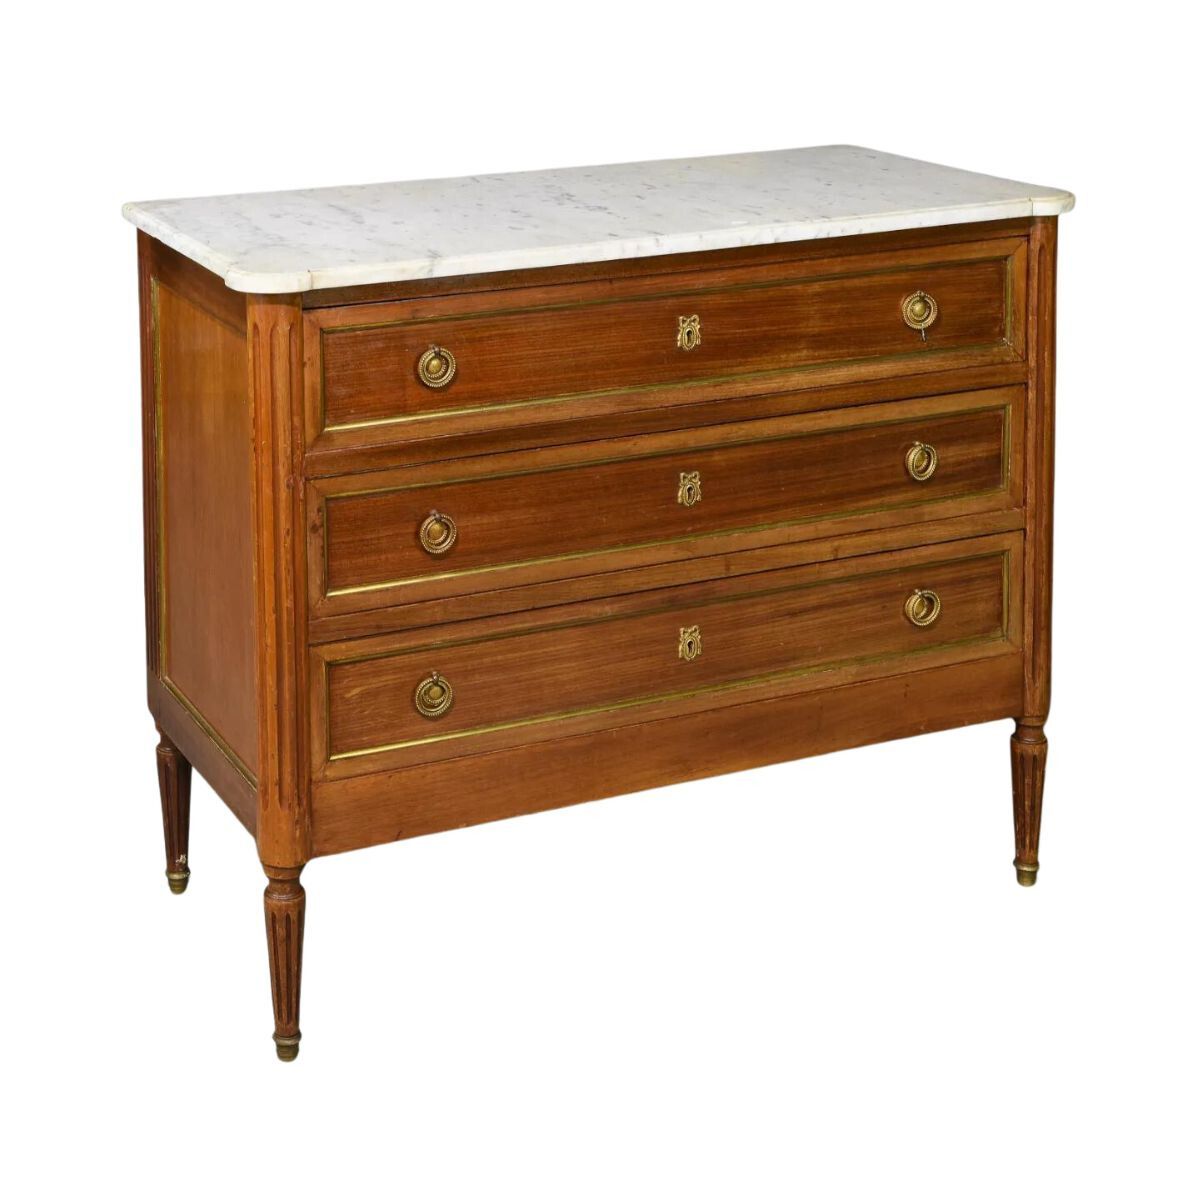 Louis XVI Style Commode with White Marble Top